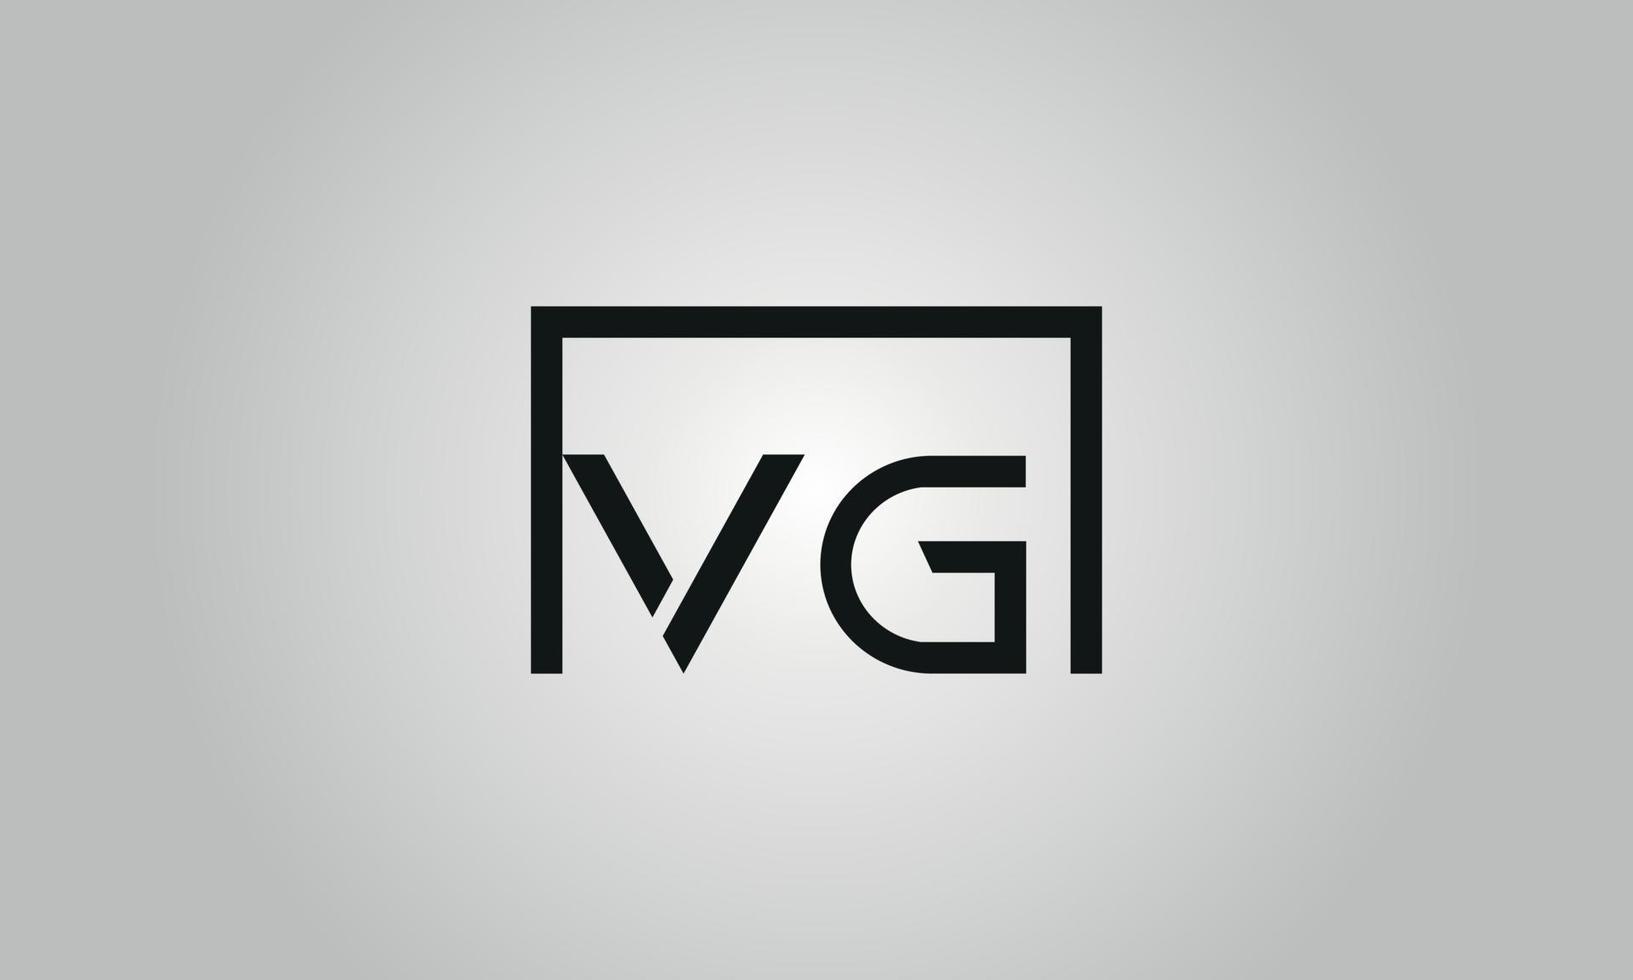 Letter VG logo design. VG logo with square shape in black colors vector free vector template.